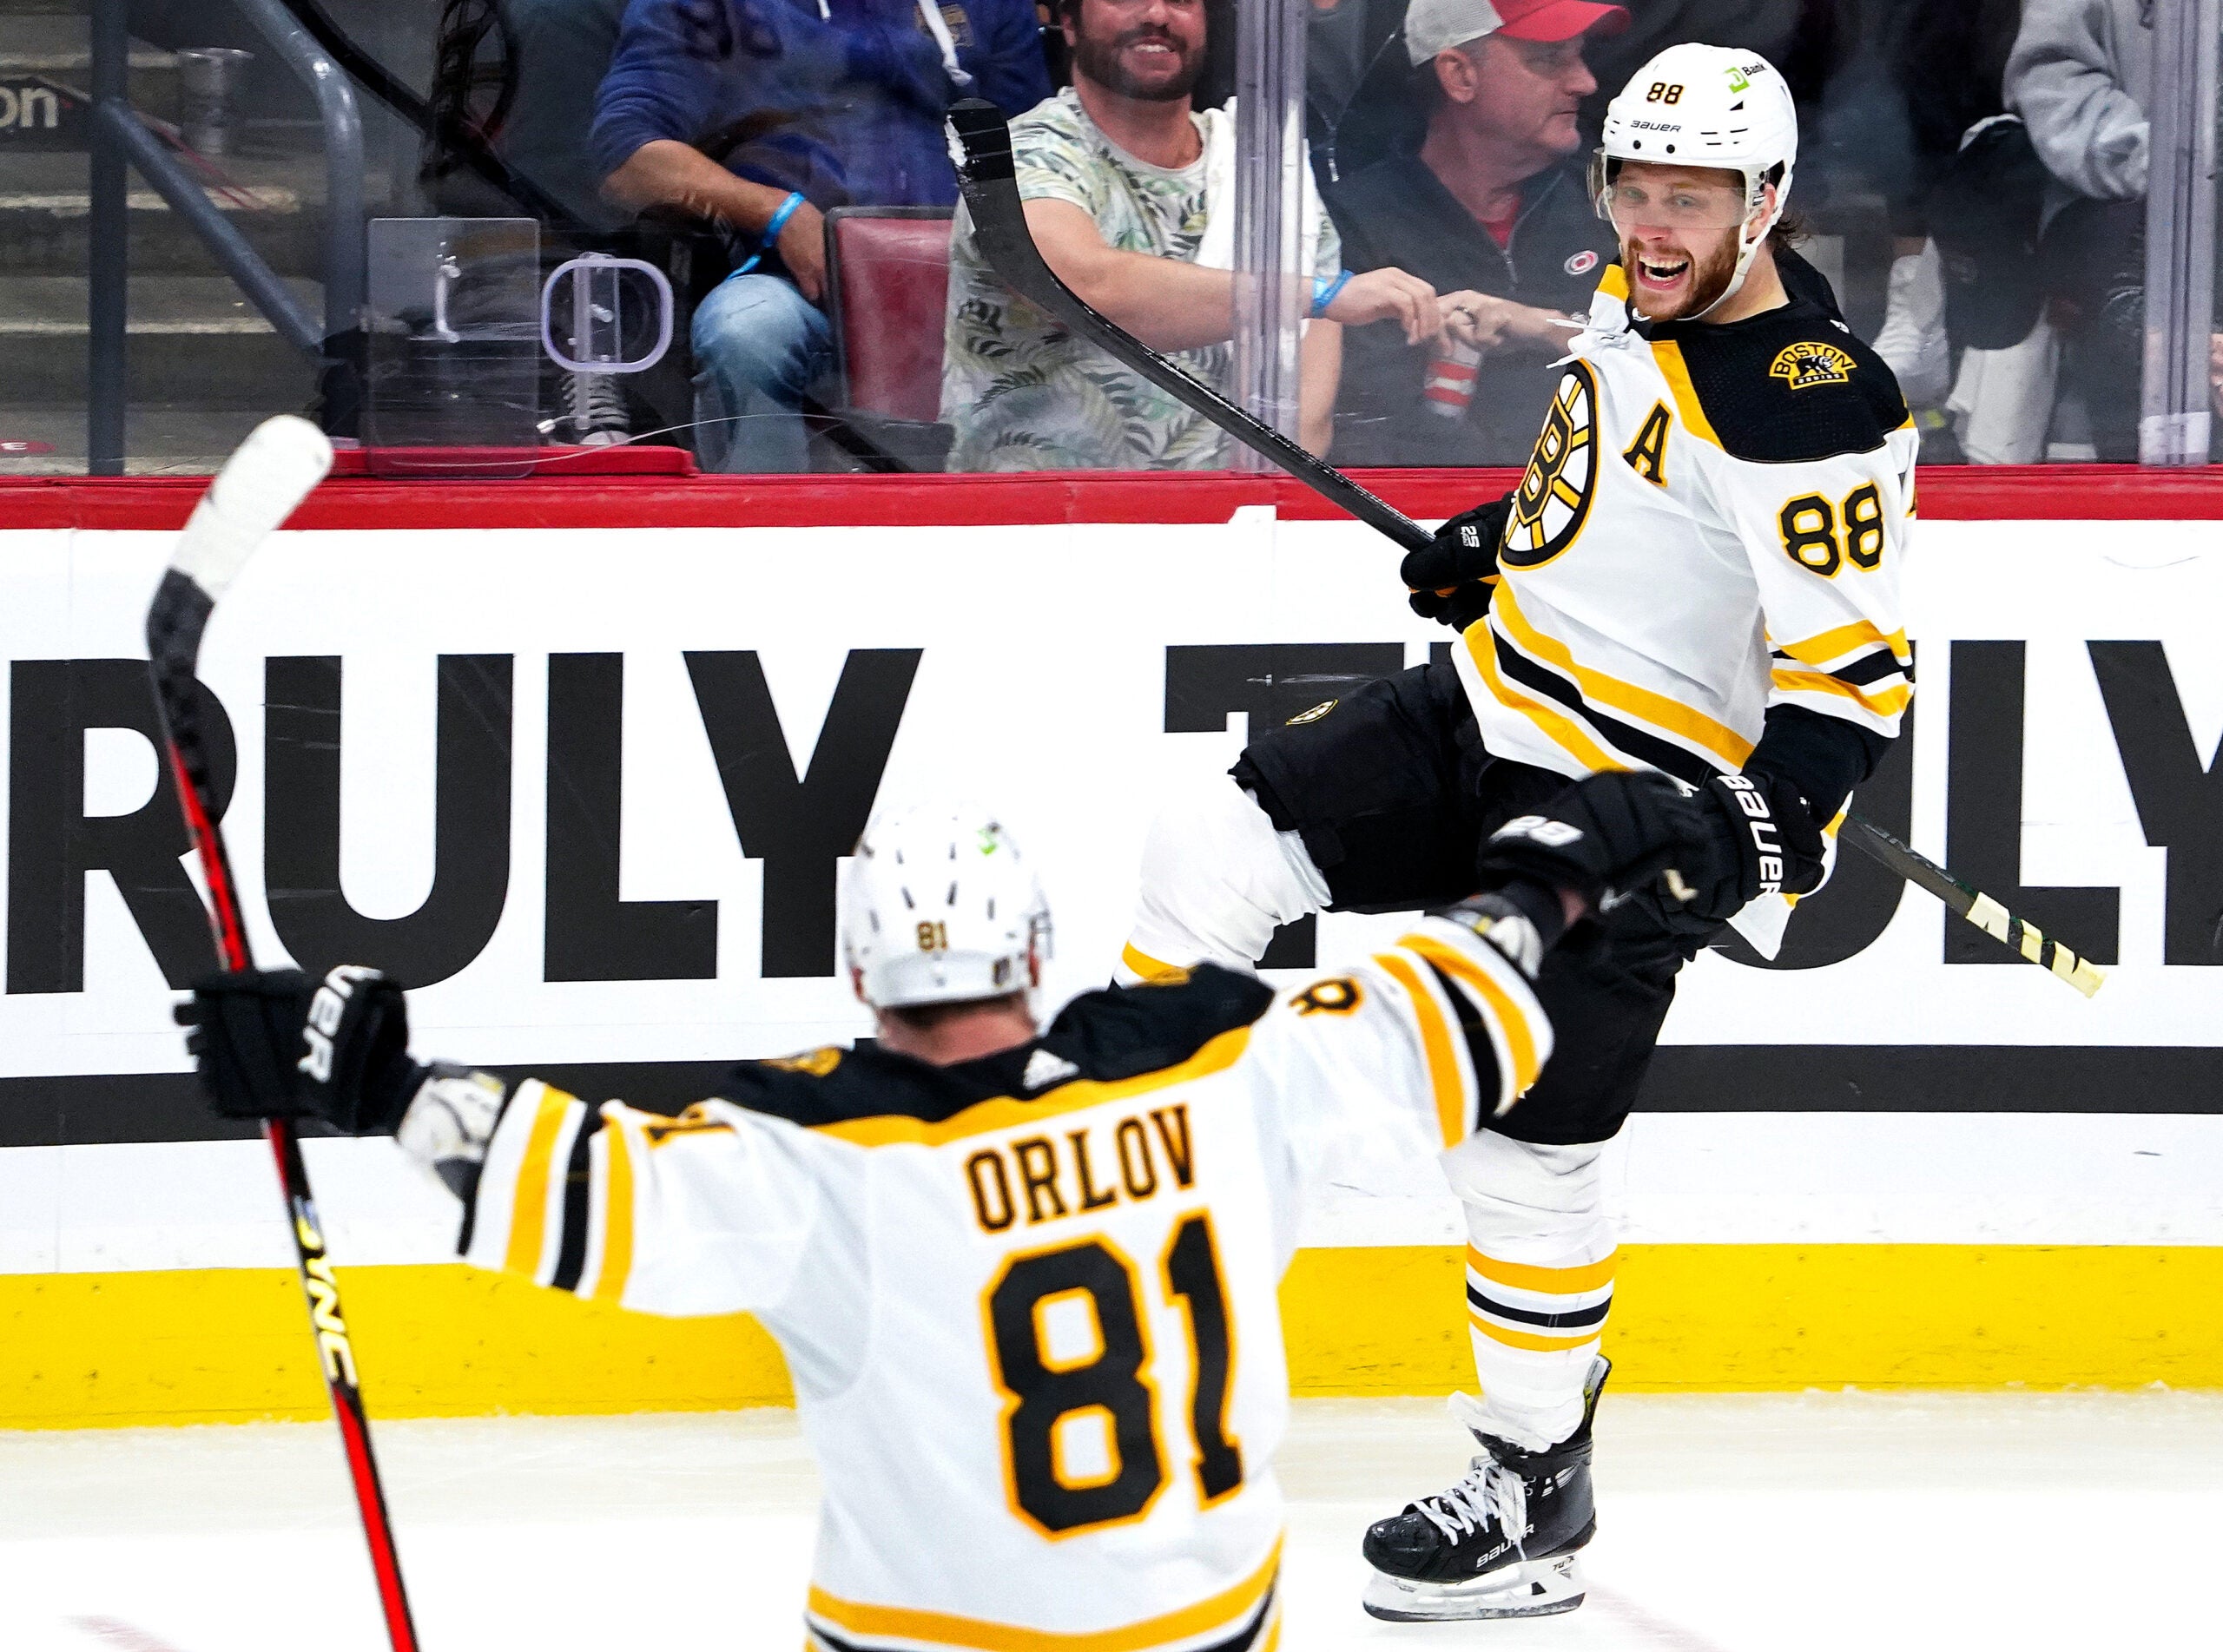 Boston Bruins right wing David Pastrnak (88) celebrates after his goal gave the Bruins a 3-0 lead in the third period. The Florida Panthers host the Boston Bruins in Game 3 of the Stanley Cup Playoffs on April 21, 2023 at FLA Live Arena in Sunrise, FL.